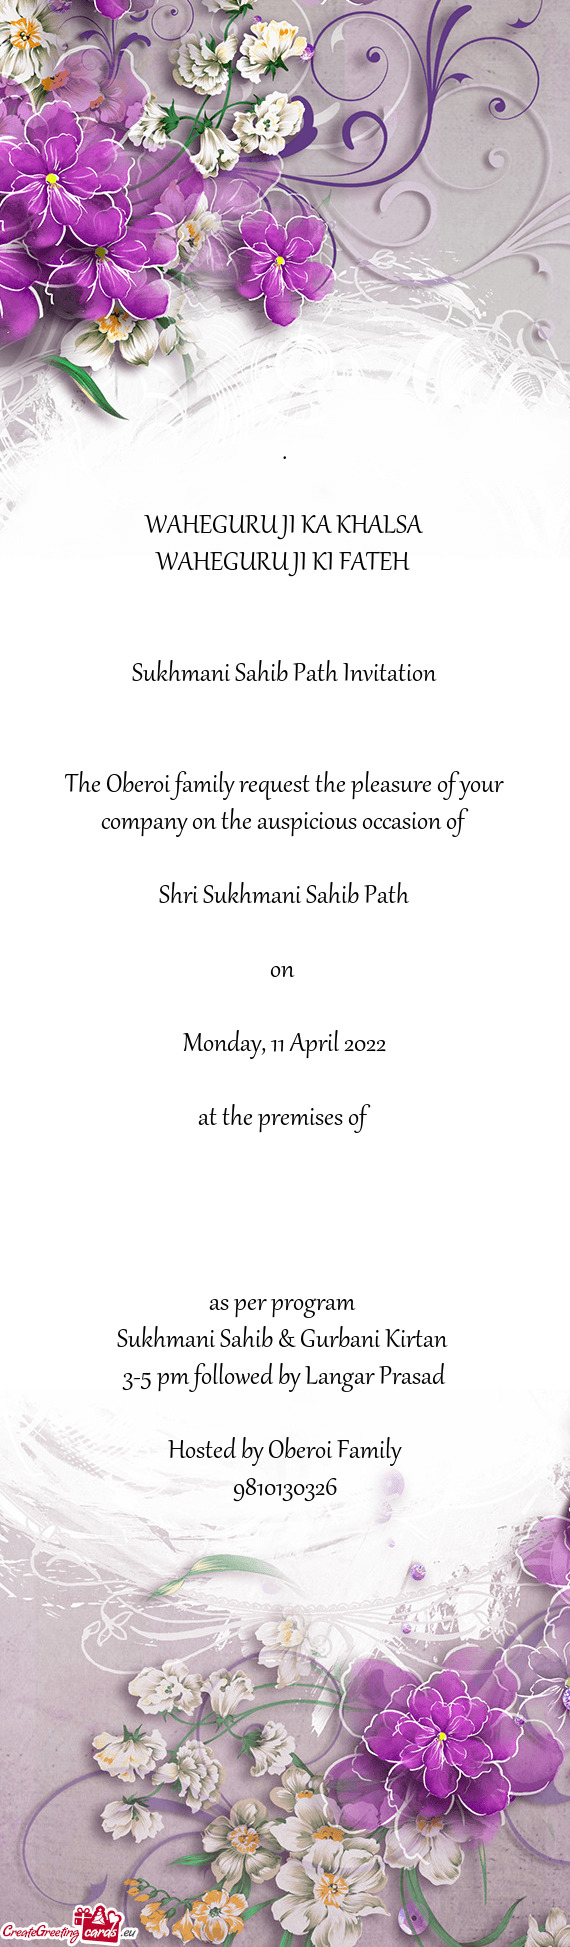 The Oberoi family request the pleasure of your company on the auspicious occasion of